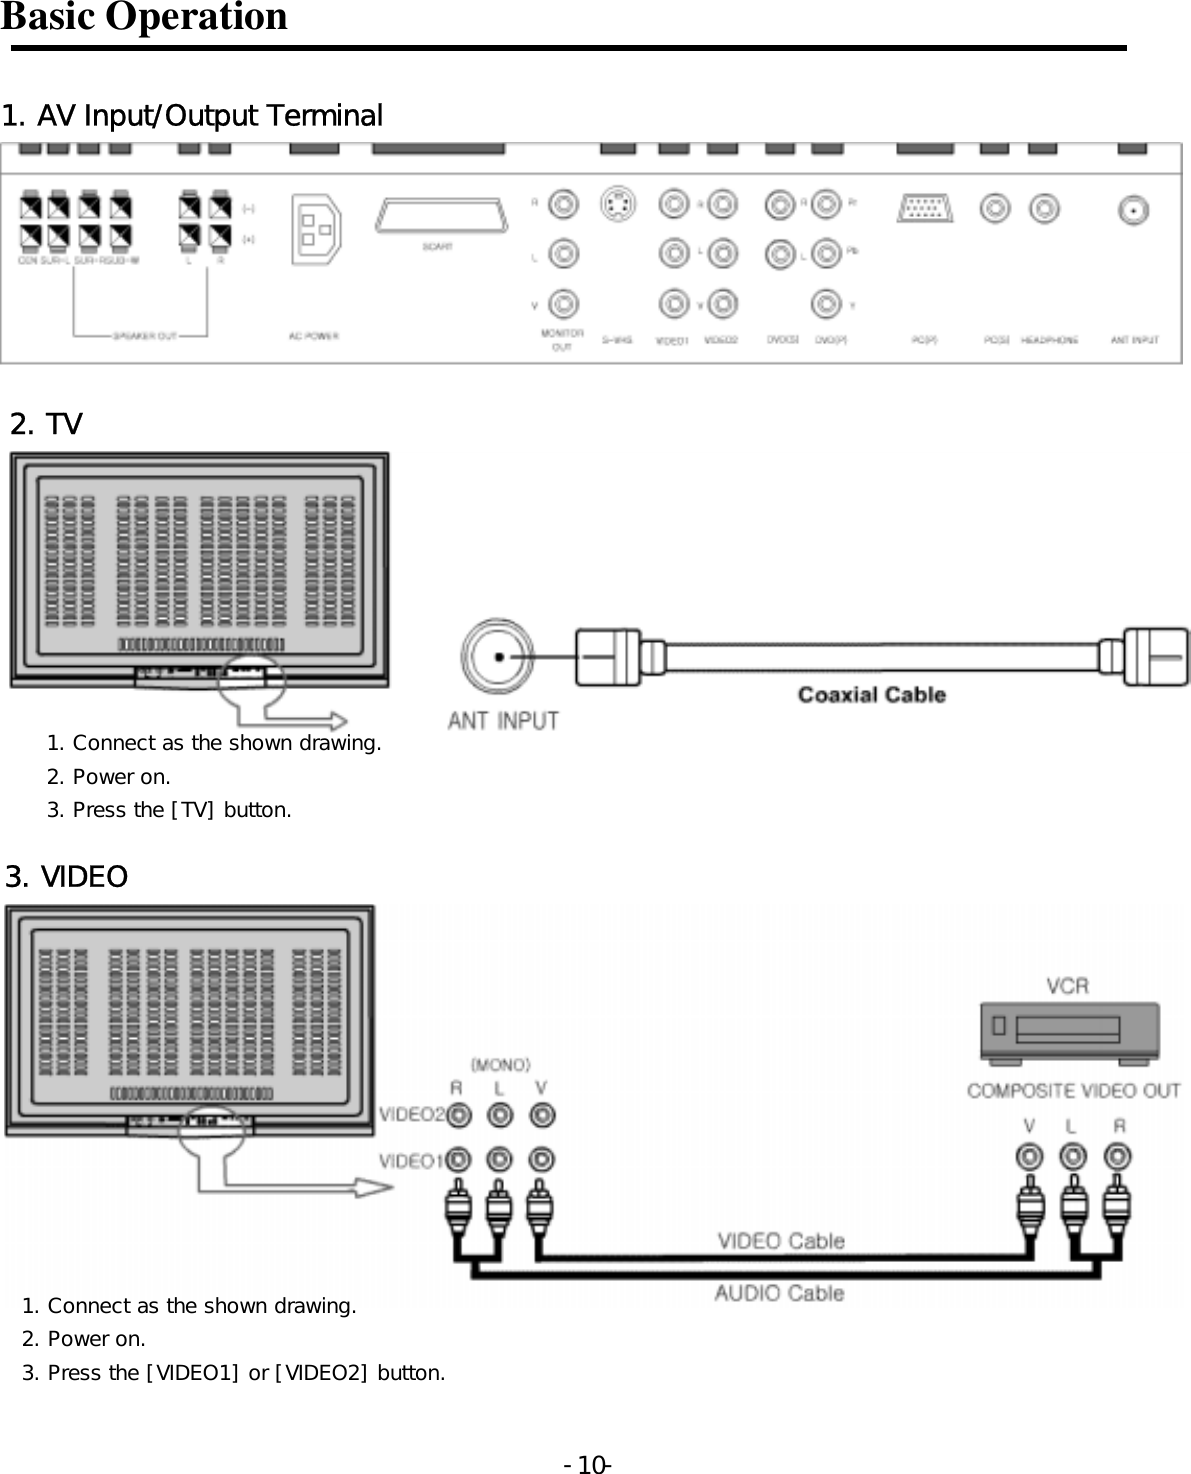 Basic Operation  1. AV Input/Output Terminal  2. TV  1. Connect as the shown drawing. 2. Power on. 3. Press the [TV] button.    3. VIDEO  1. Connect as the shown drawing. 2. Power on. 3. Press the [VIDEO1] or [VIDEO2] button.  -  - 10